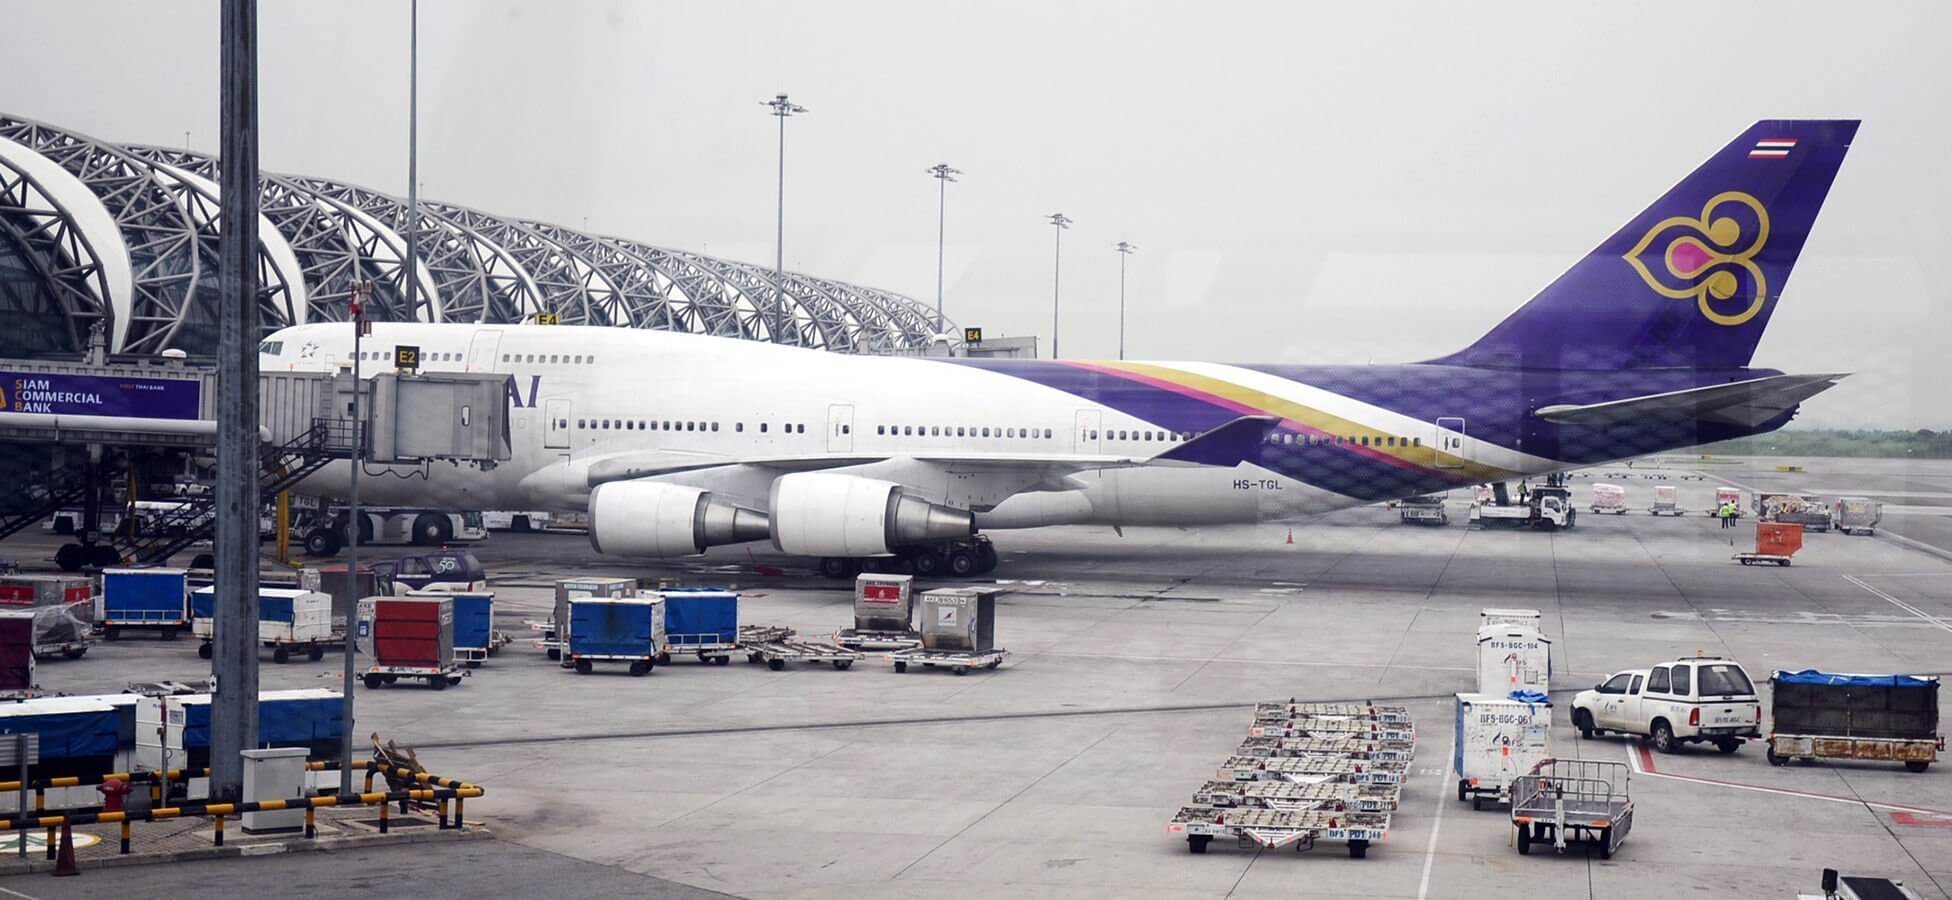 Thai Airways files for bankruptcy protection